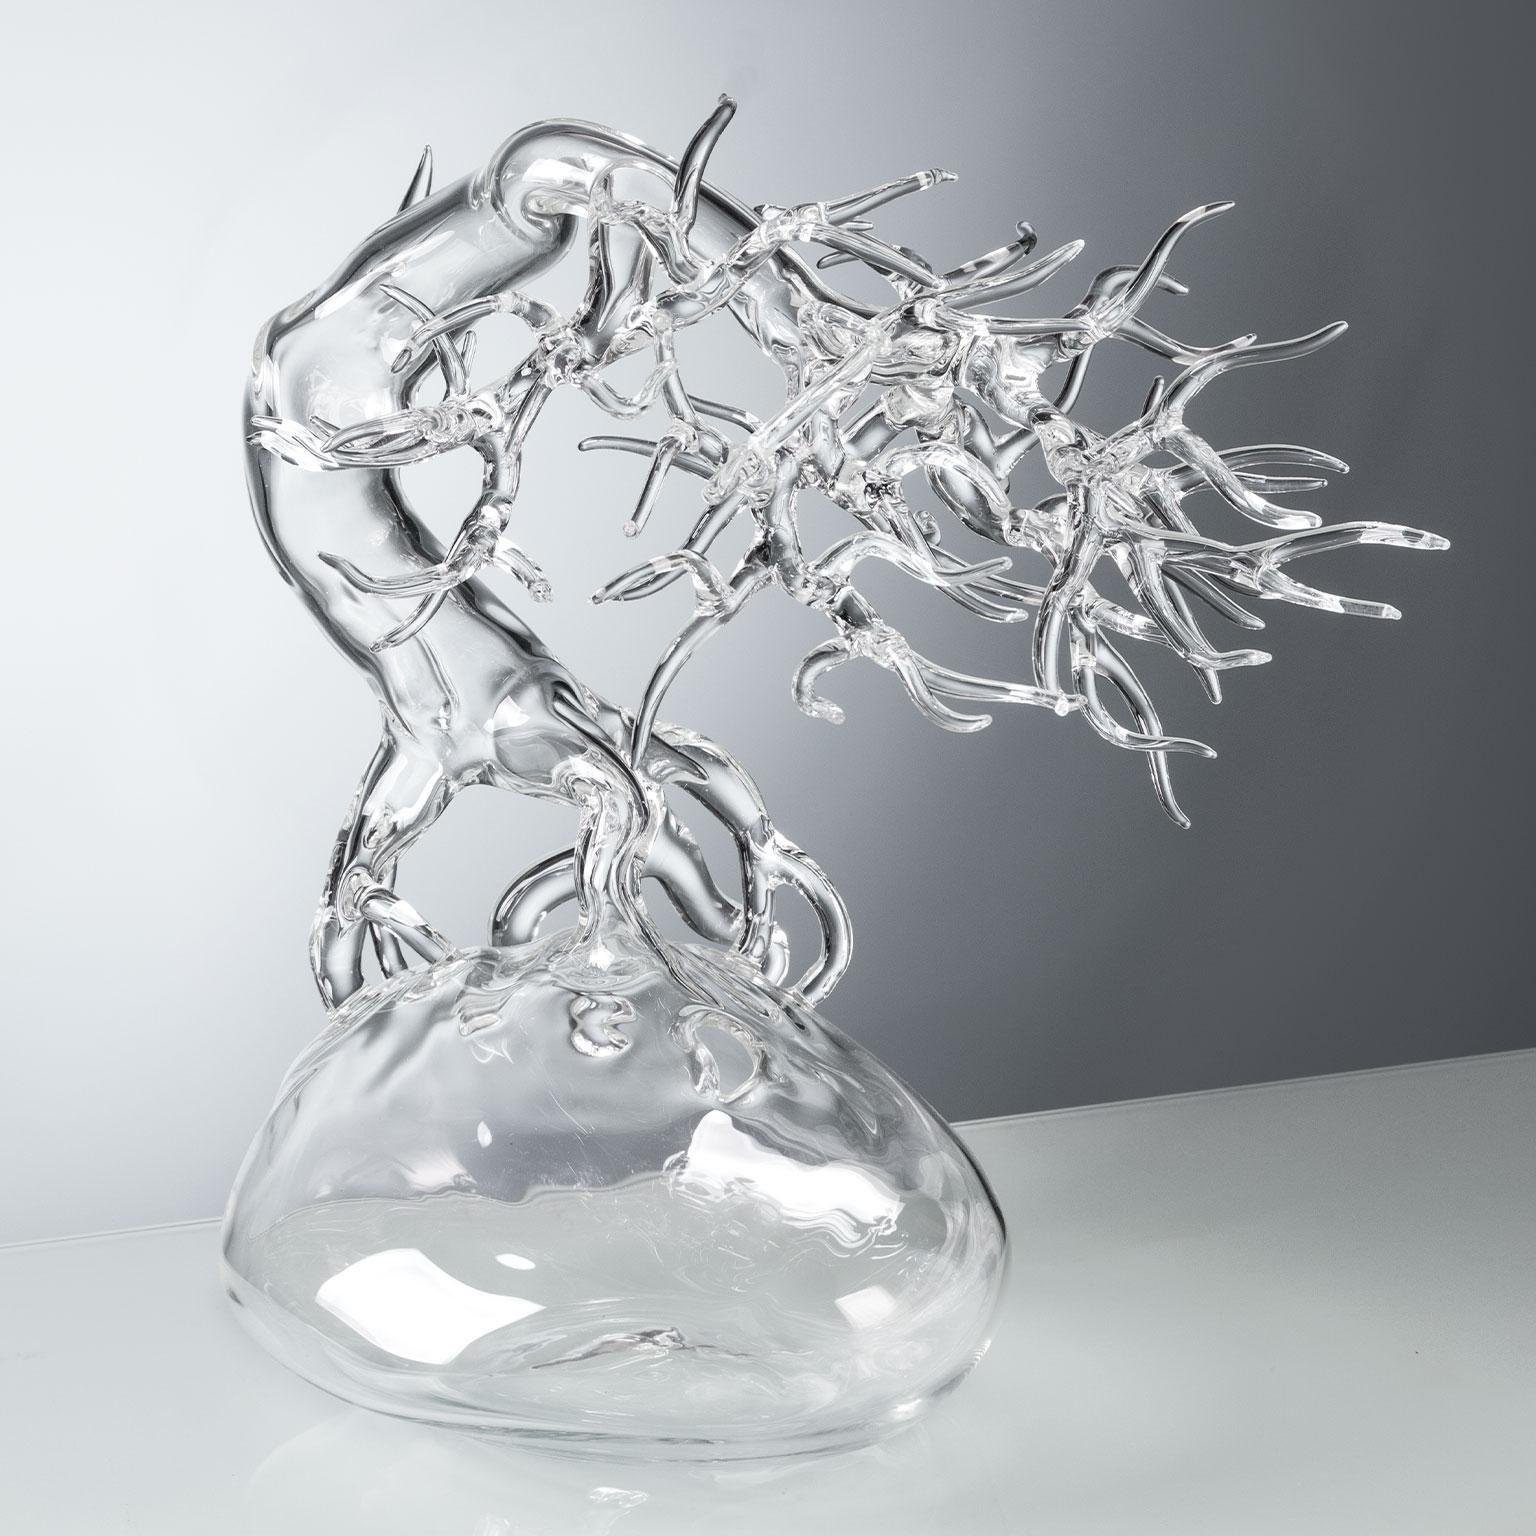 Hand blown glass sculpture representing a bonsai tree.

Artist: Simone Crestani
Material: Borosilicate glass
Technique: Flameworking
Unique piece
Year: 2019
Measures: Height 11.4”, width 9.4”, depth 11”.
Signed and dated on the trunk.